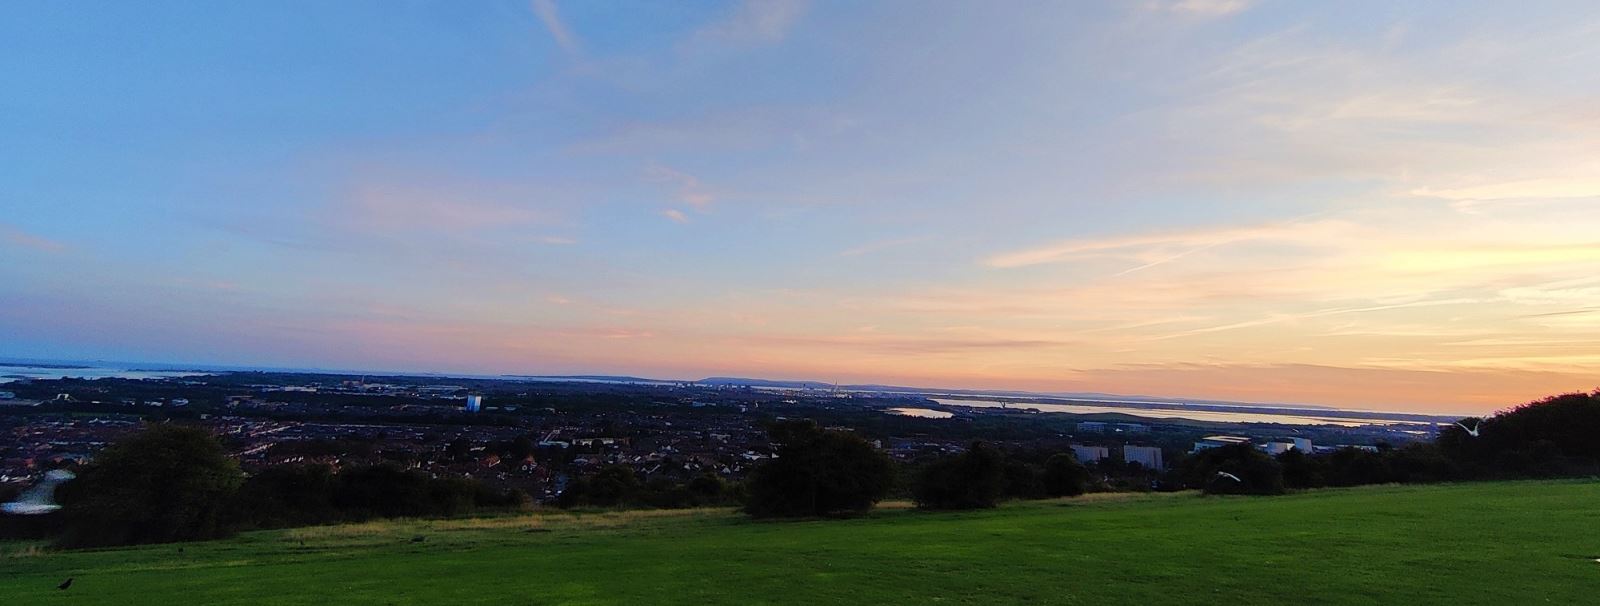 Narrow image of Portsmouth, viewed from Portsdown Hill at dusk